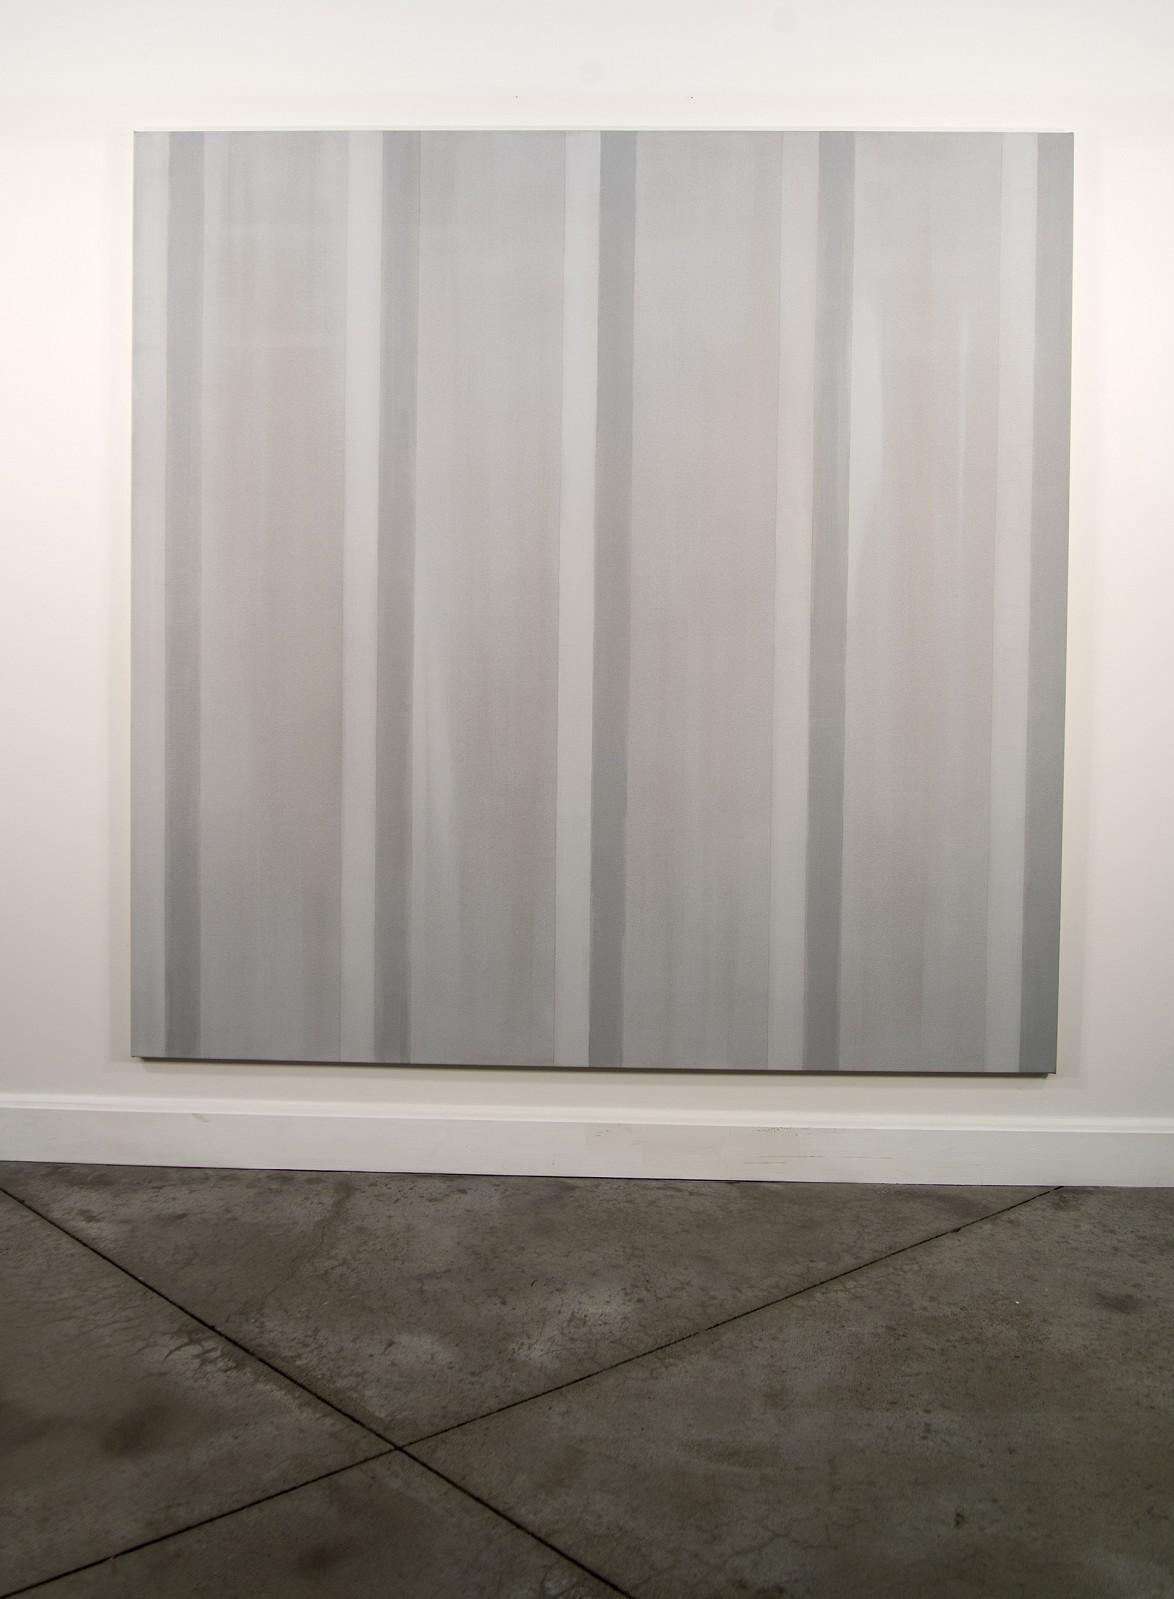 Everything and Nothing - large, tranquil, calm, grey, vertical stripes - Abstract Painting by Milly Ristvedt